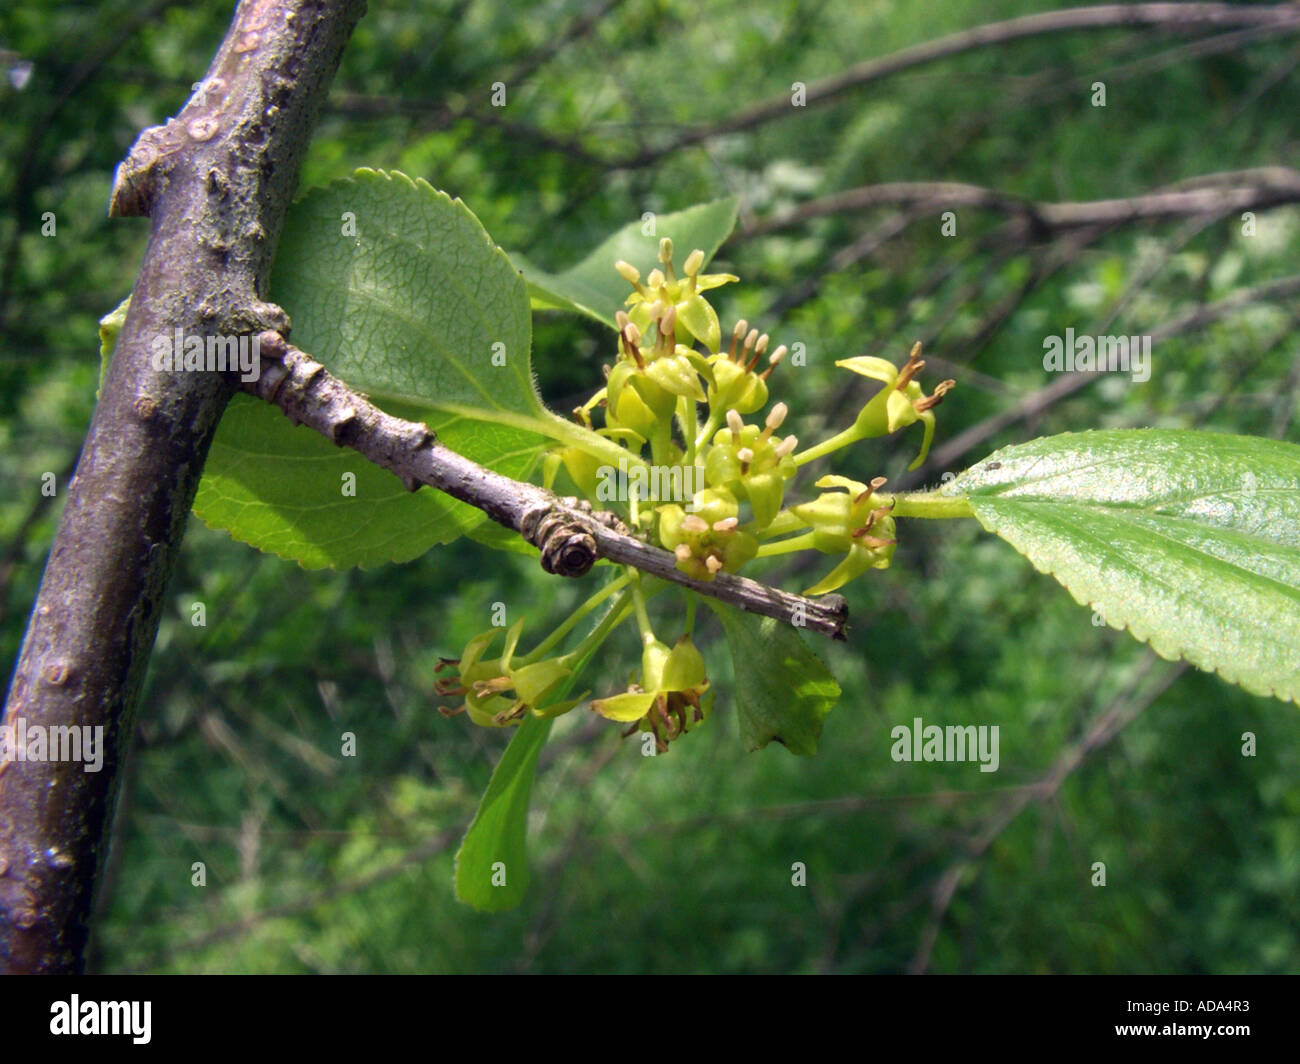 common buckthorn (Rhamnus catharticus), feed plant for the brimestone, inflorescence Stock Photo